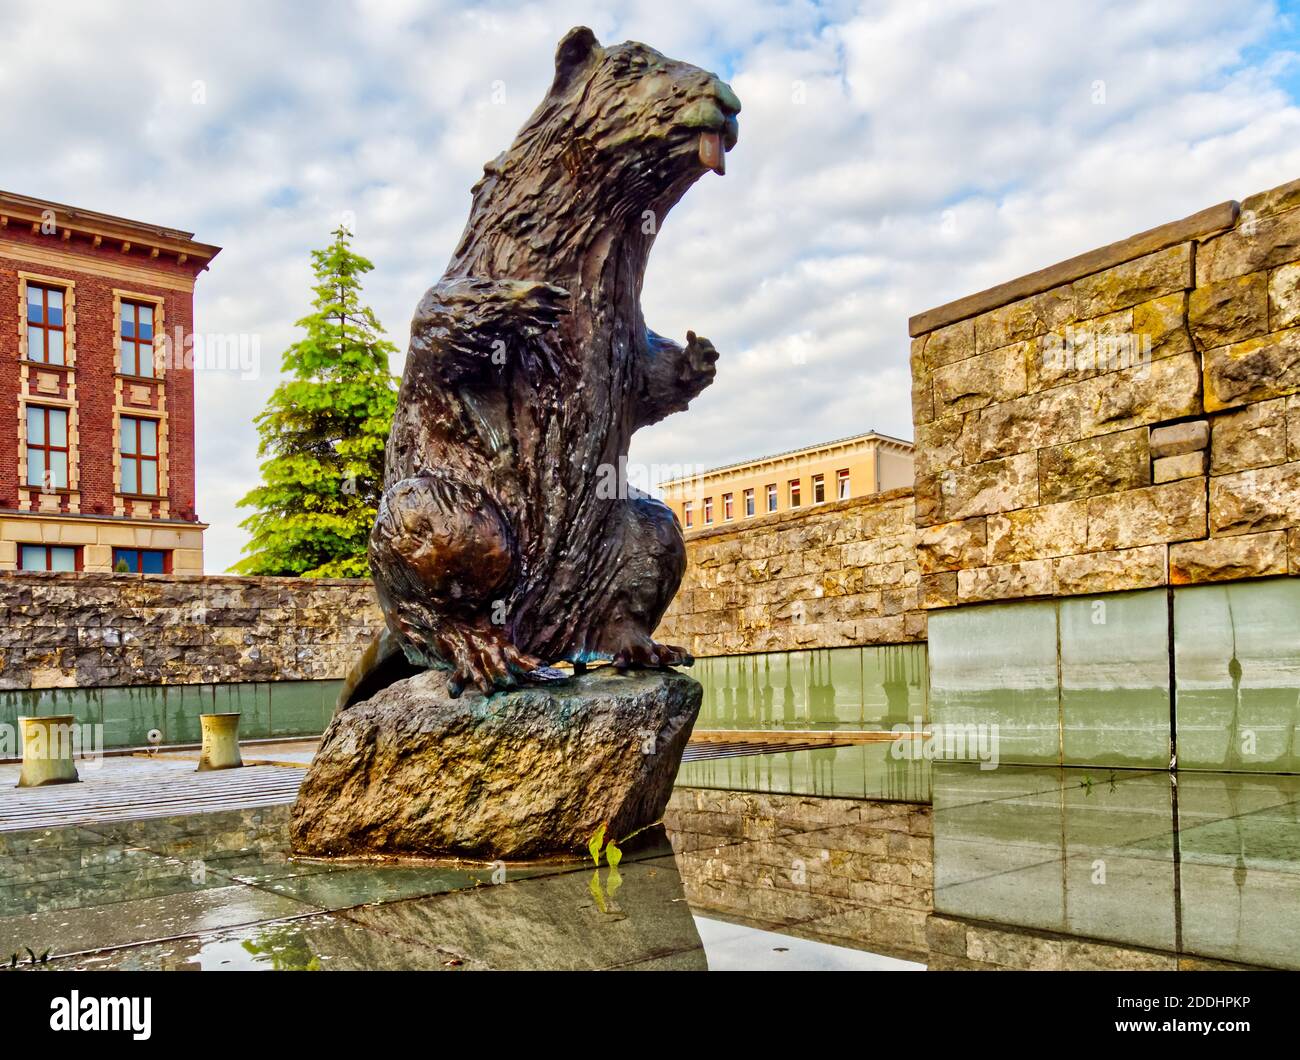 Wide angle perspective at small beaver statue (circa 50cm) located in center of Dabrowa Gornicza city is looking like an enormous monster now standing Stock Photo